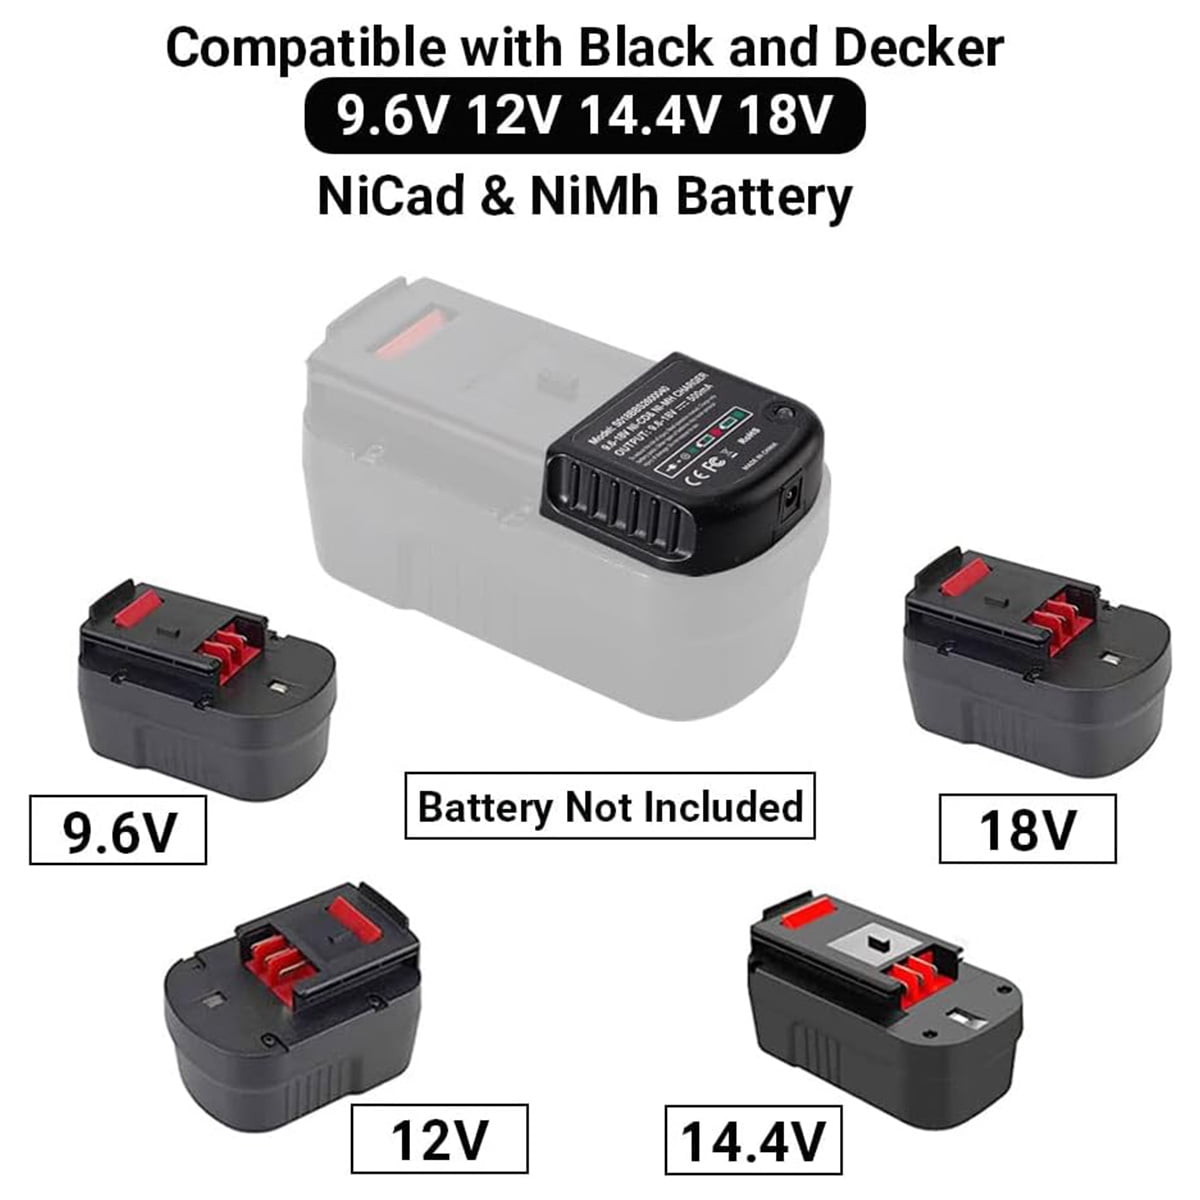 BLACK & DECKER 9.6v-18v Universal Charger Unboxing and Review 